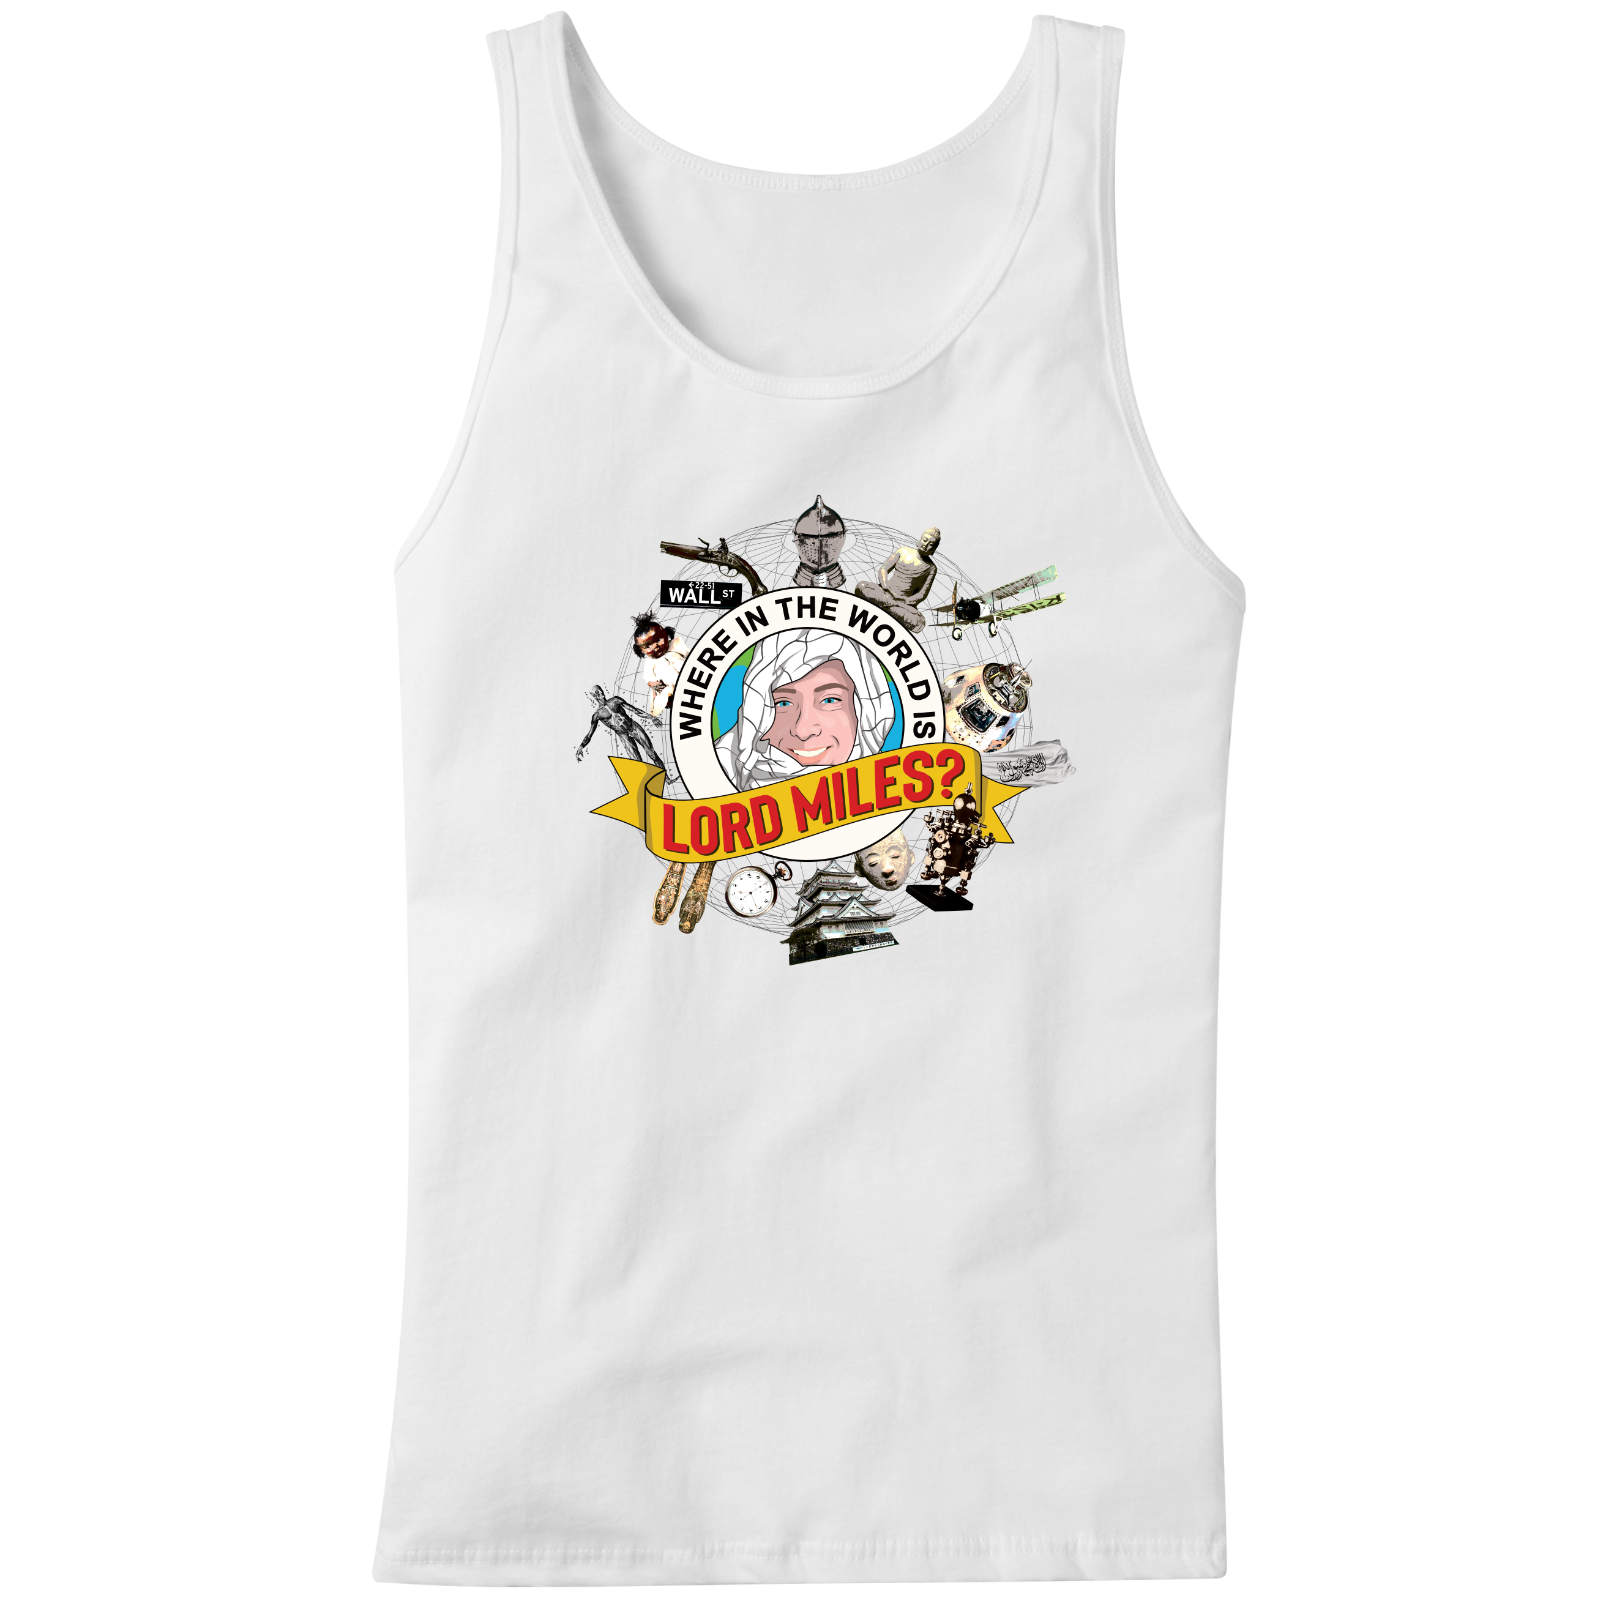 Where in the World is Lord Miles? Tanktop